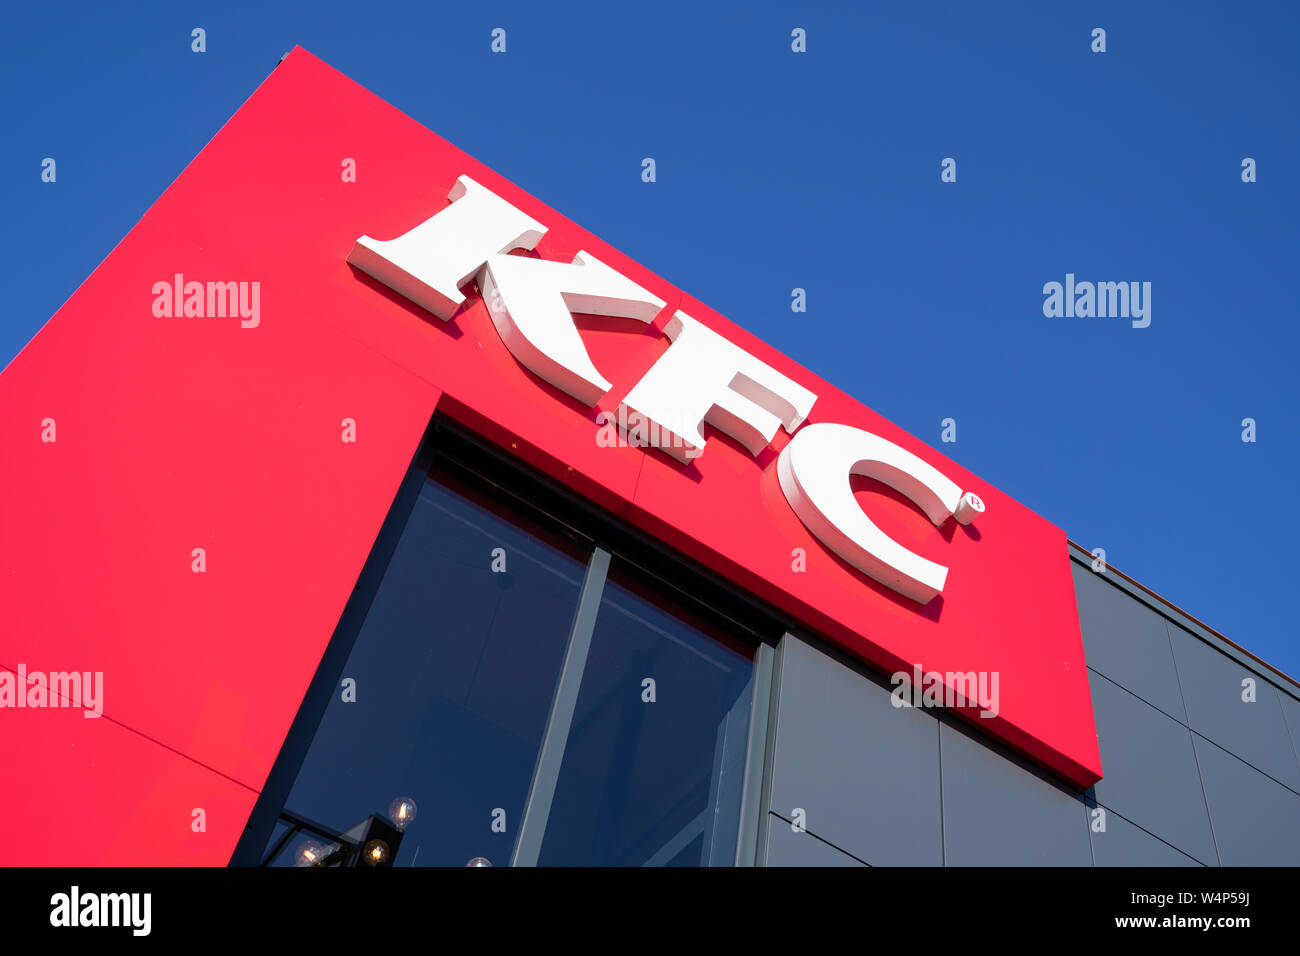 KFC sign at fast food restaurant. Kentucky Fried Chicken (KFC) is the world's second largest restaurant chain with almost 20,000 locations globally. Stock Photo